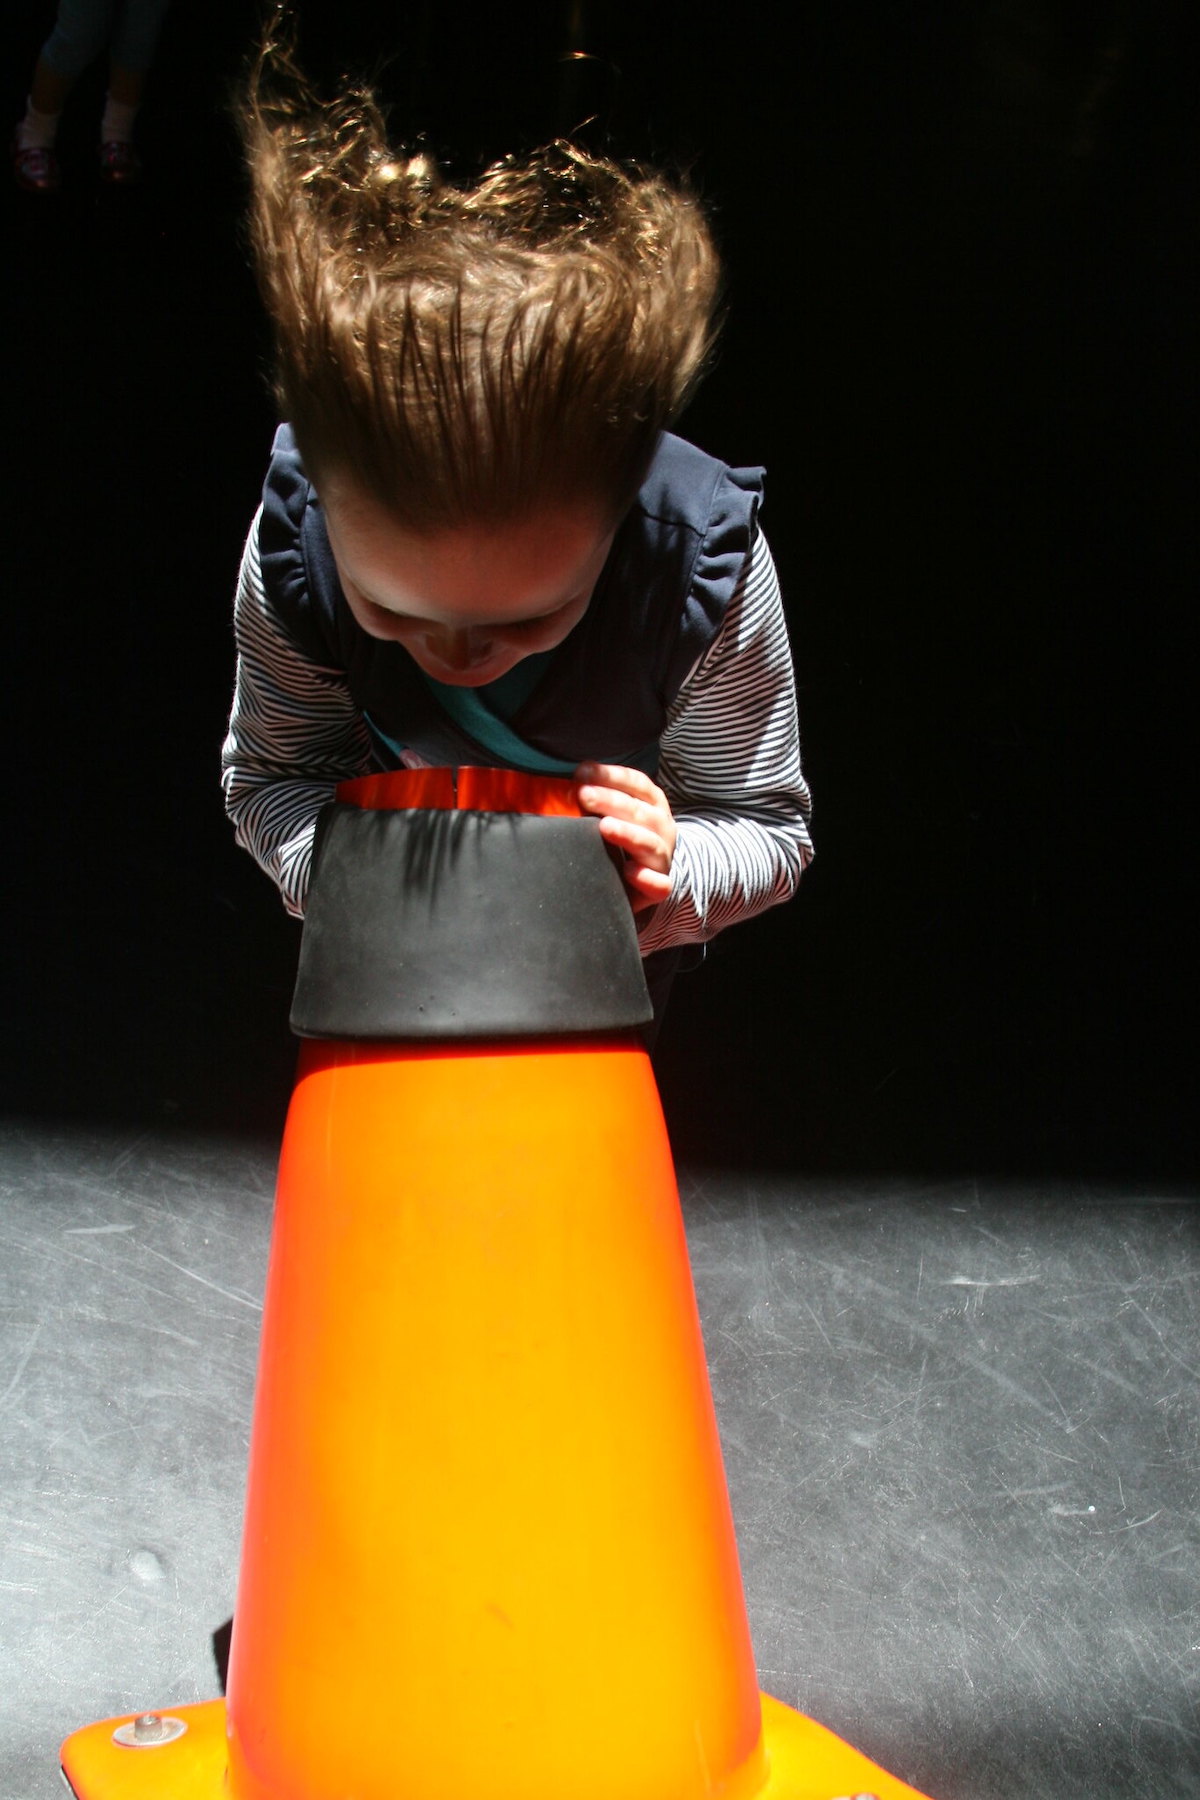 A child stands with their face above an orange cone, with a wind blowing their hair back.